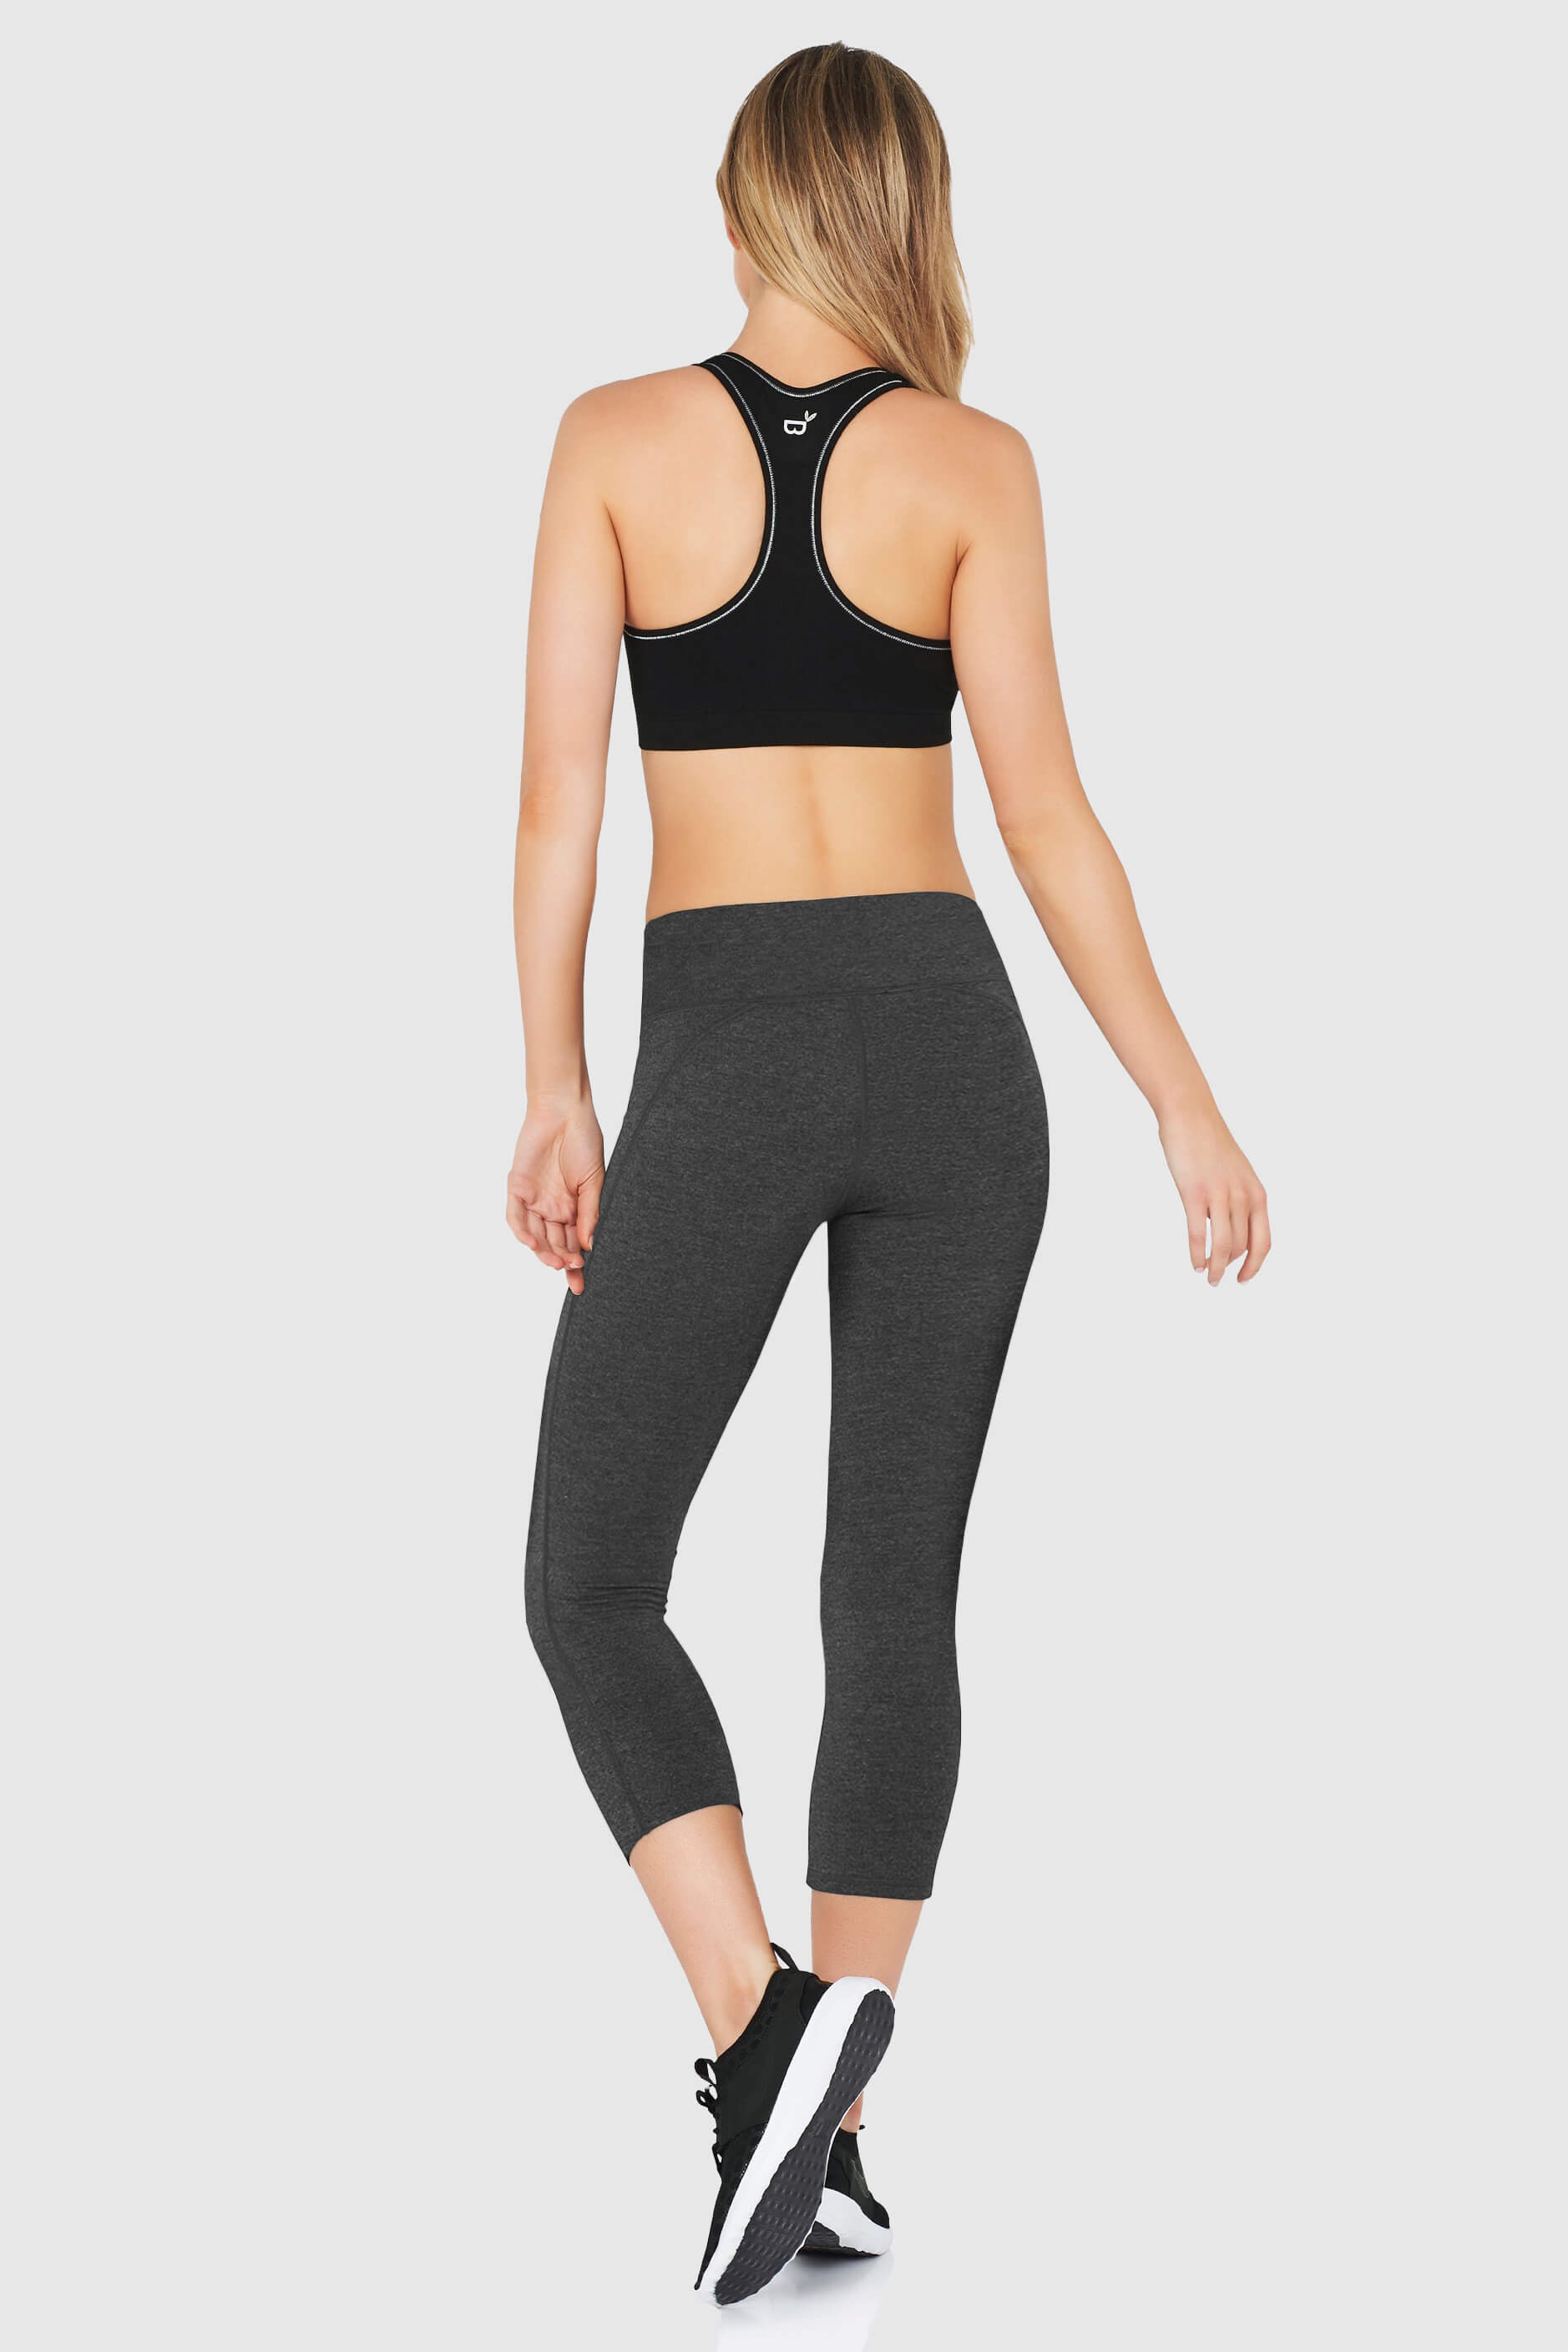 Boody Bamboo 3/4 Active Exercise Leggings Womens in Dark Grey Rear View